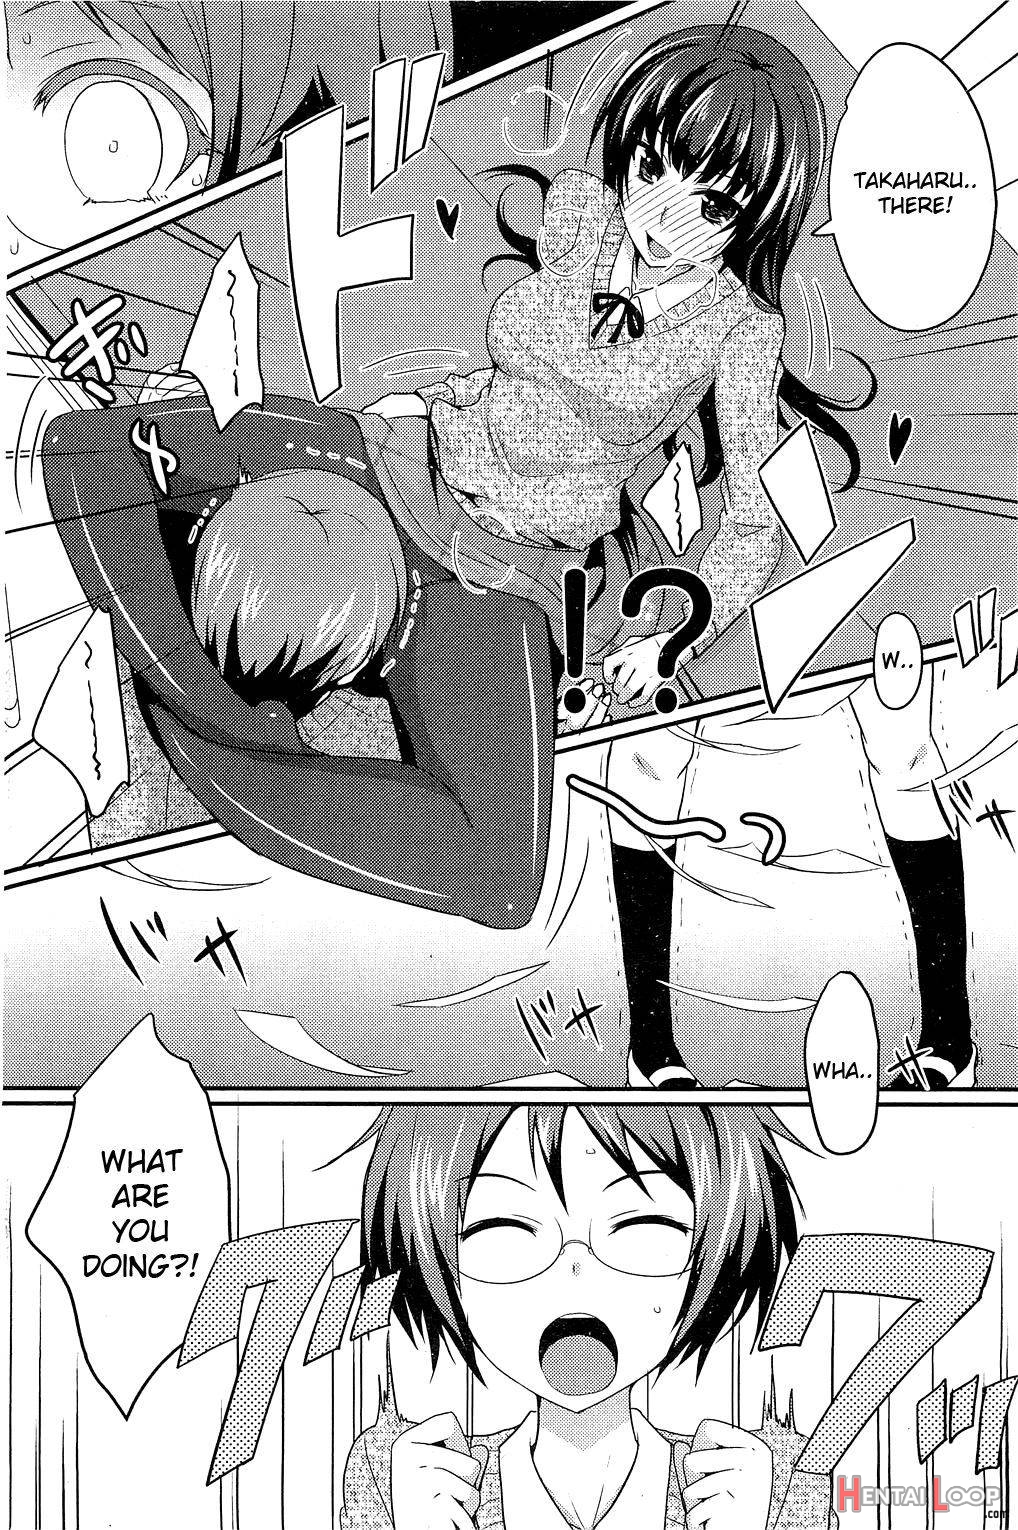 Chubby Girl Anime - Page 1 of The Chubby Girl And The Queen (by Shijou Sadafumi) - Hentai  doujinshi for free at HentaiLoop